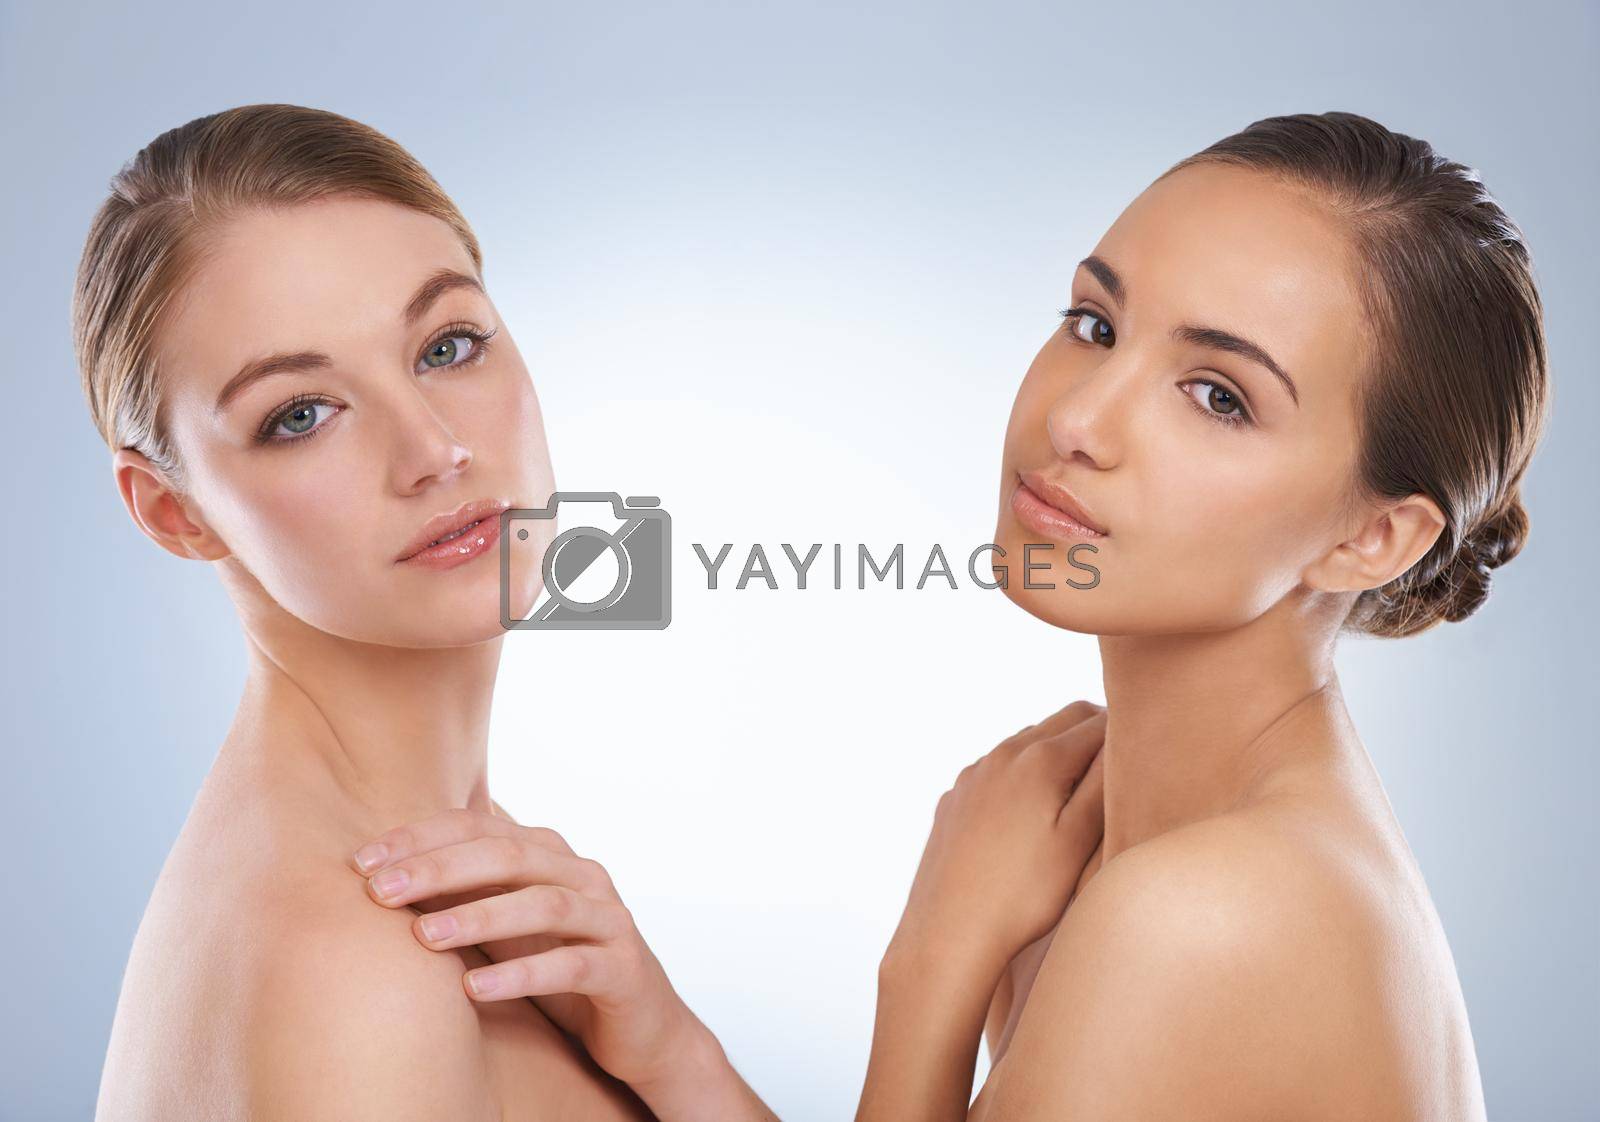 Natural beauty of youth. Studio beauty shot of a two young models